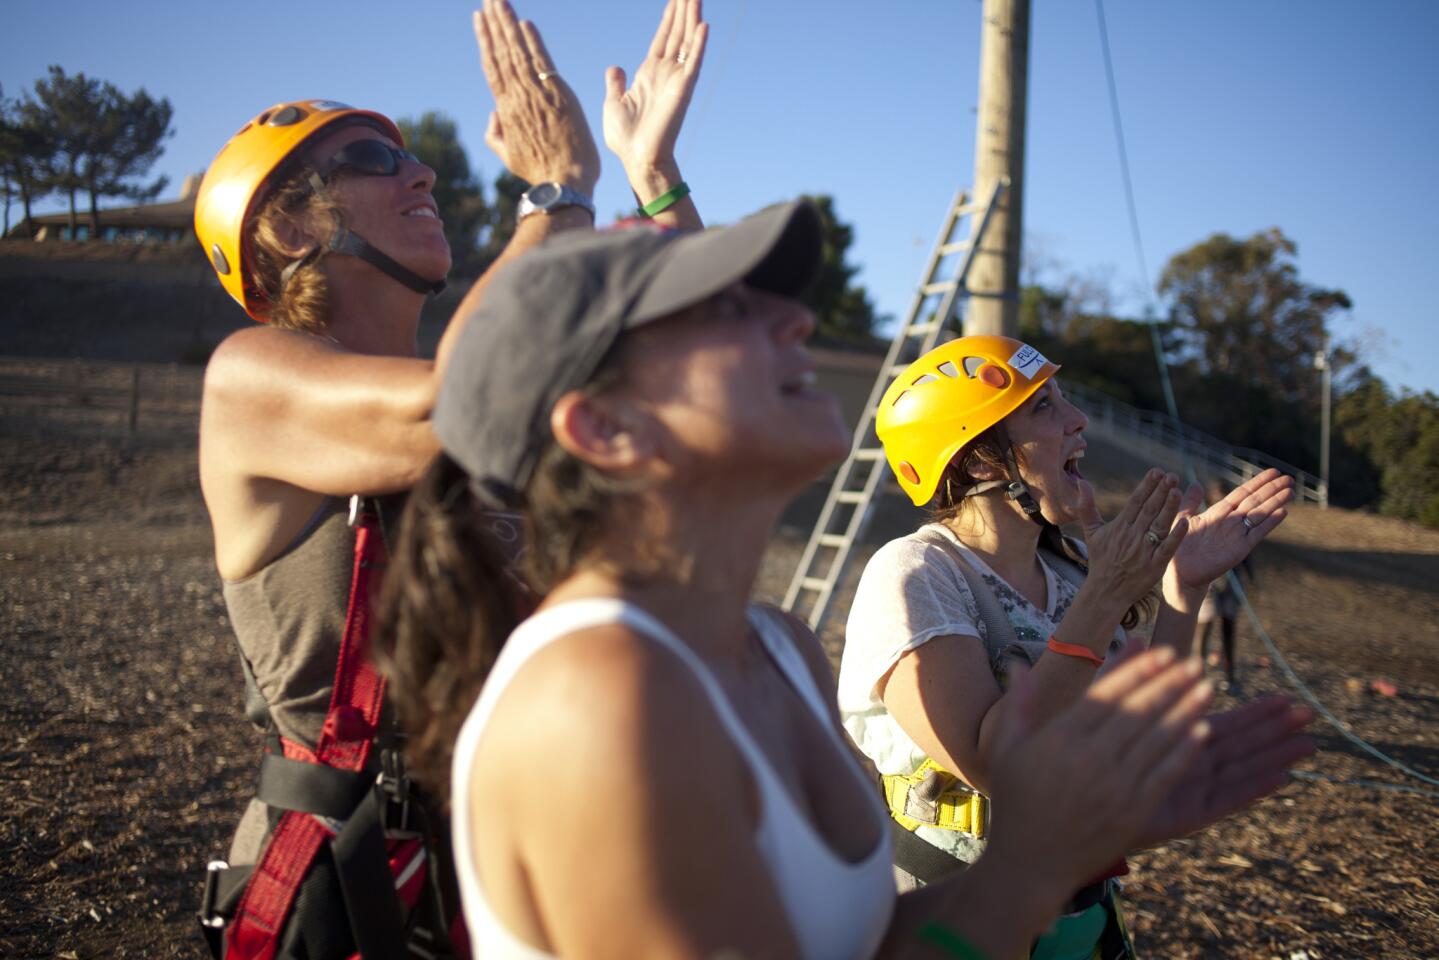 Angela Piatelli, left, an attendee (who wished to remain unnamed), center, and Jolie Schooler cheer on women participating in the ropes course at the Gindling Hilltop Camp during Campowerment.